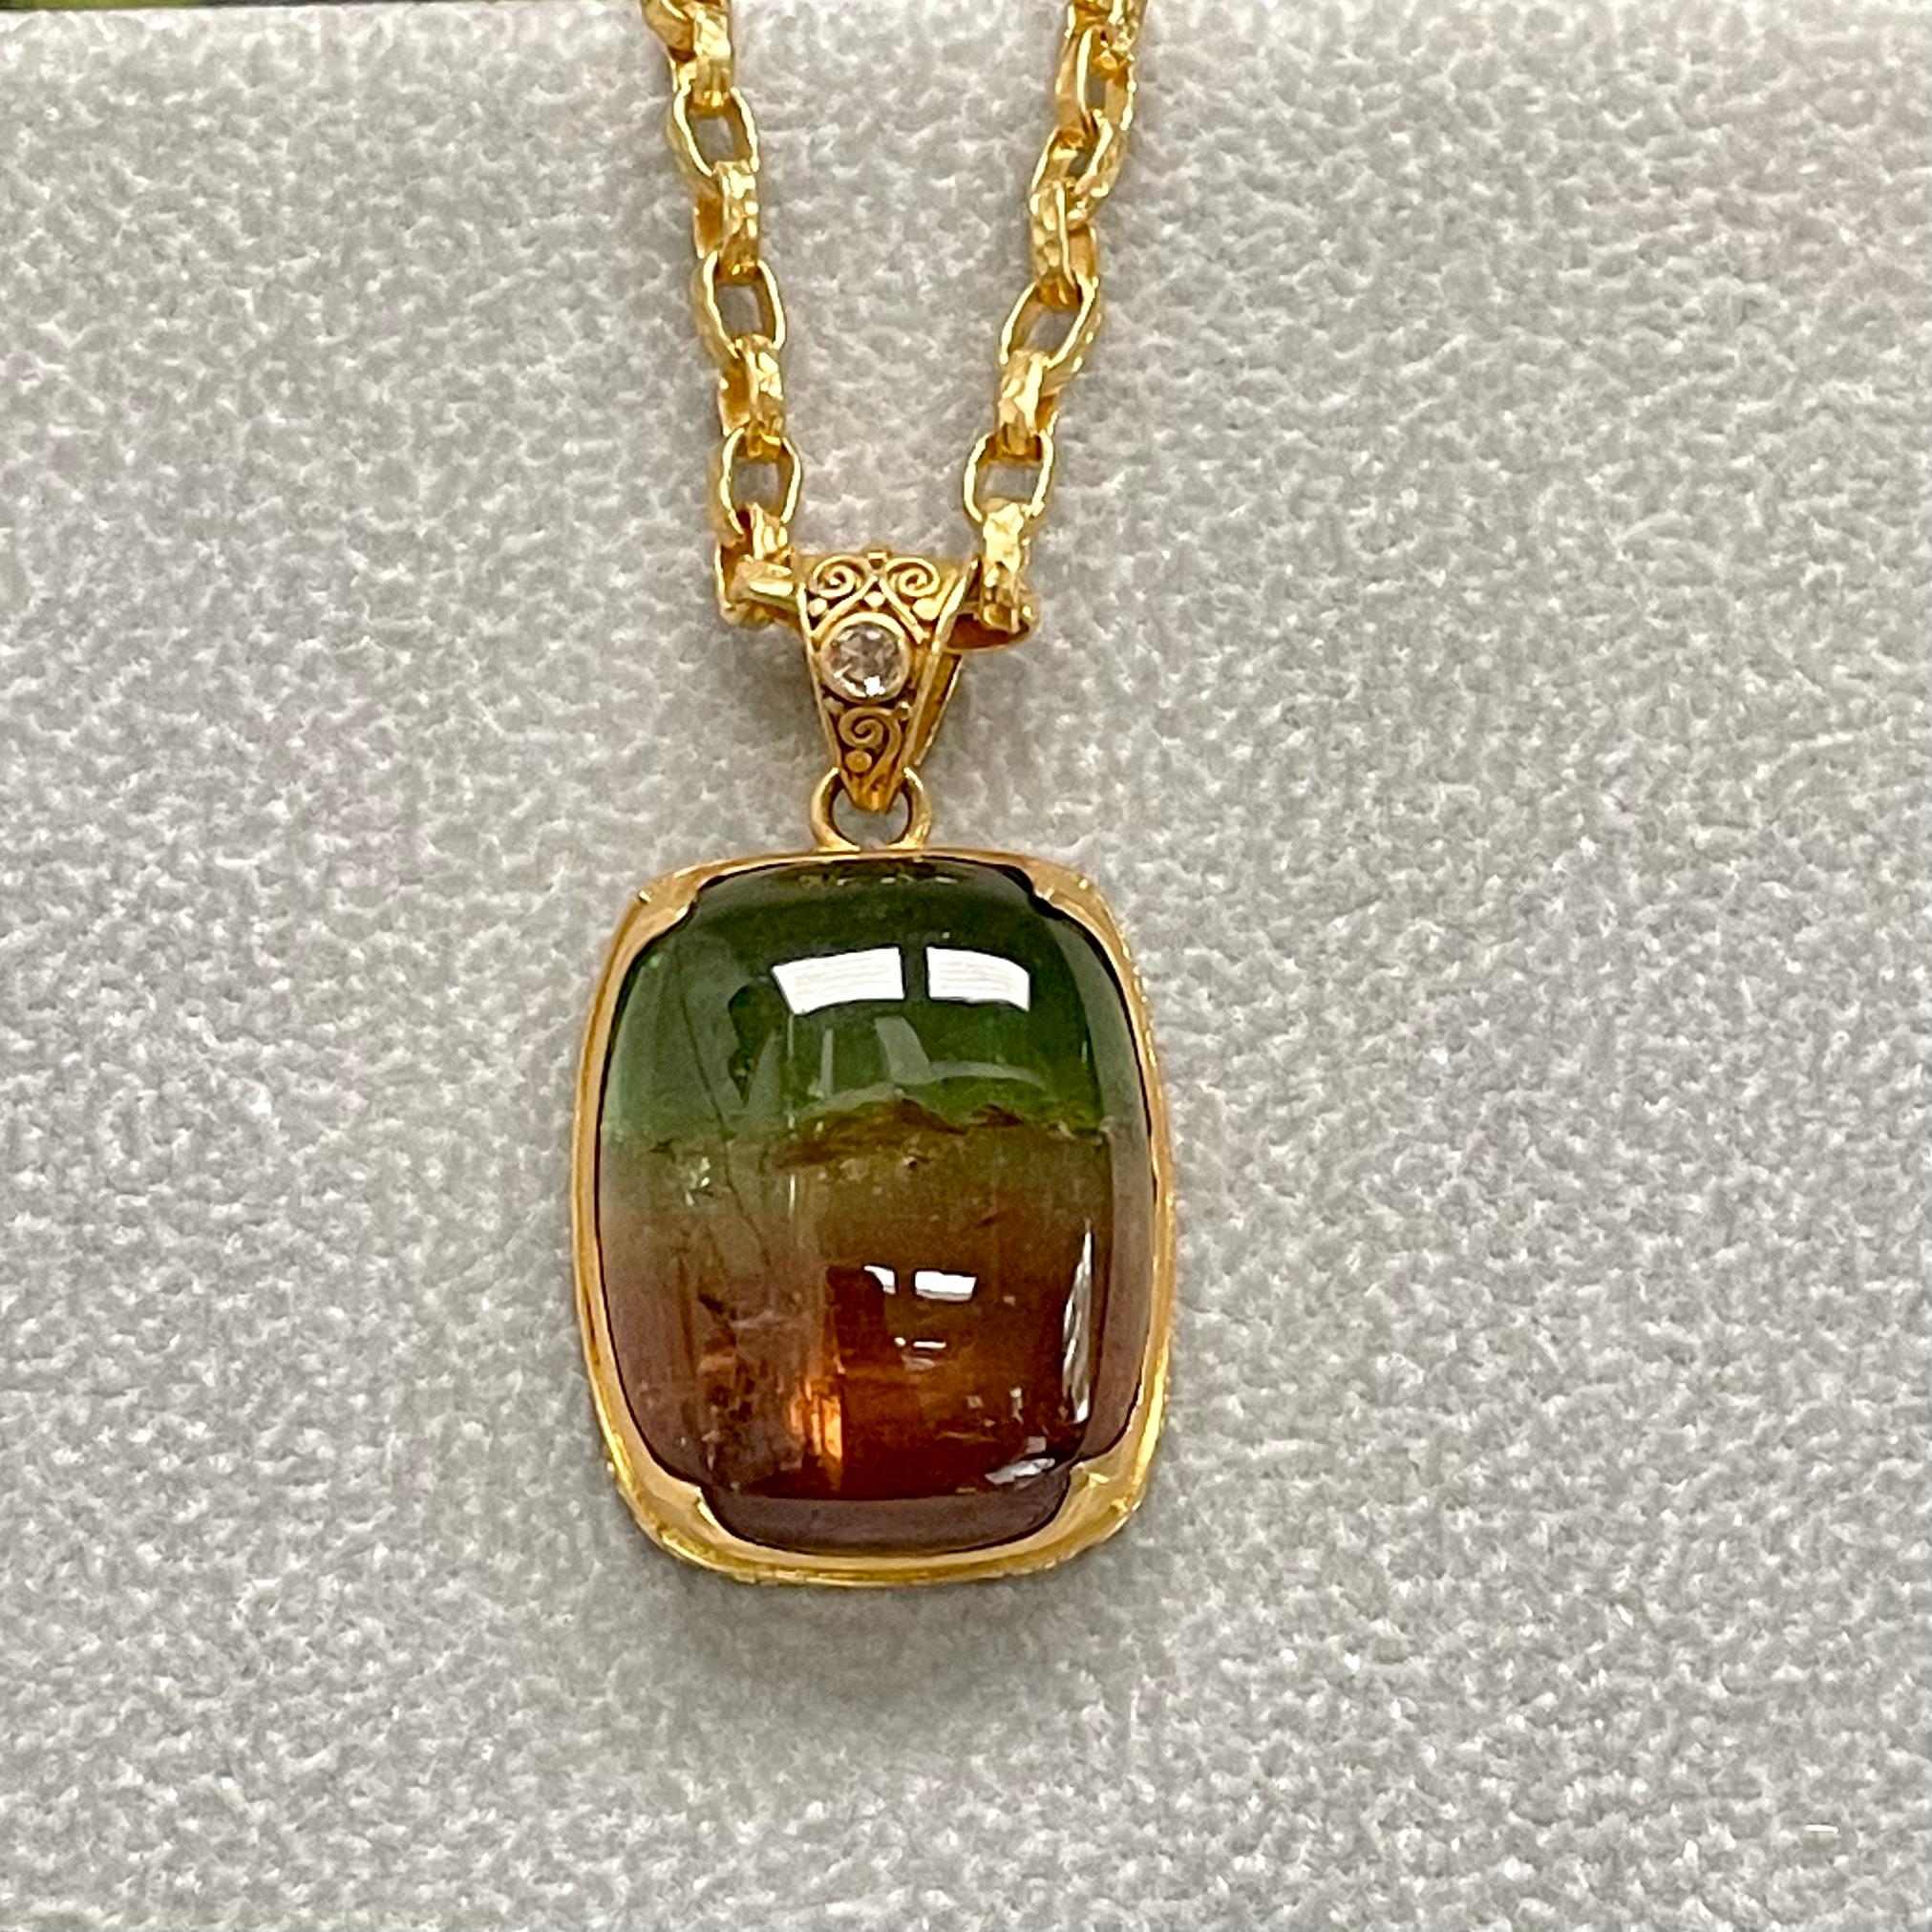 A nicely graduated 25 x 30 mm rounded rectangular cabochon of Brazilian watermelon tourmaline displays a range of colors between greens and reds. It is set in a handmade 